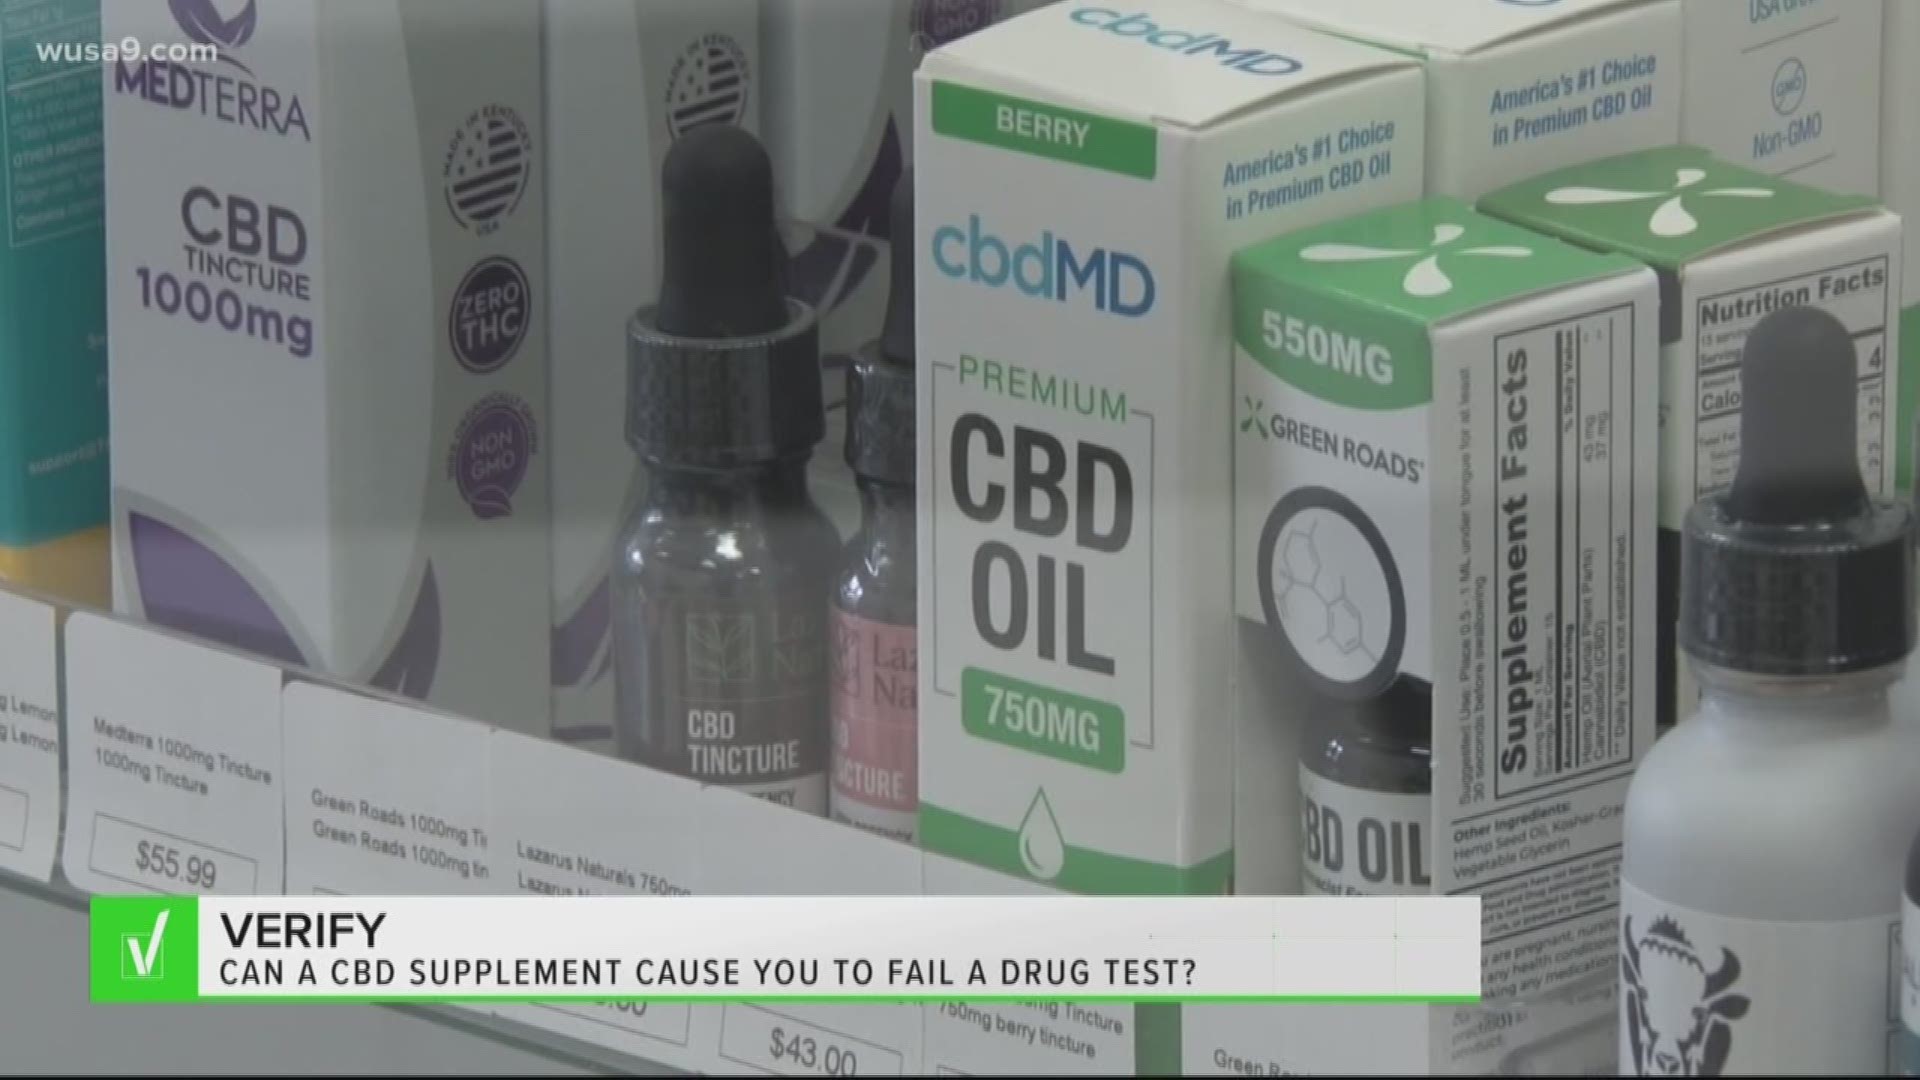 If you take CBD supplements there is a possibility you could fail a drug test.